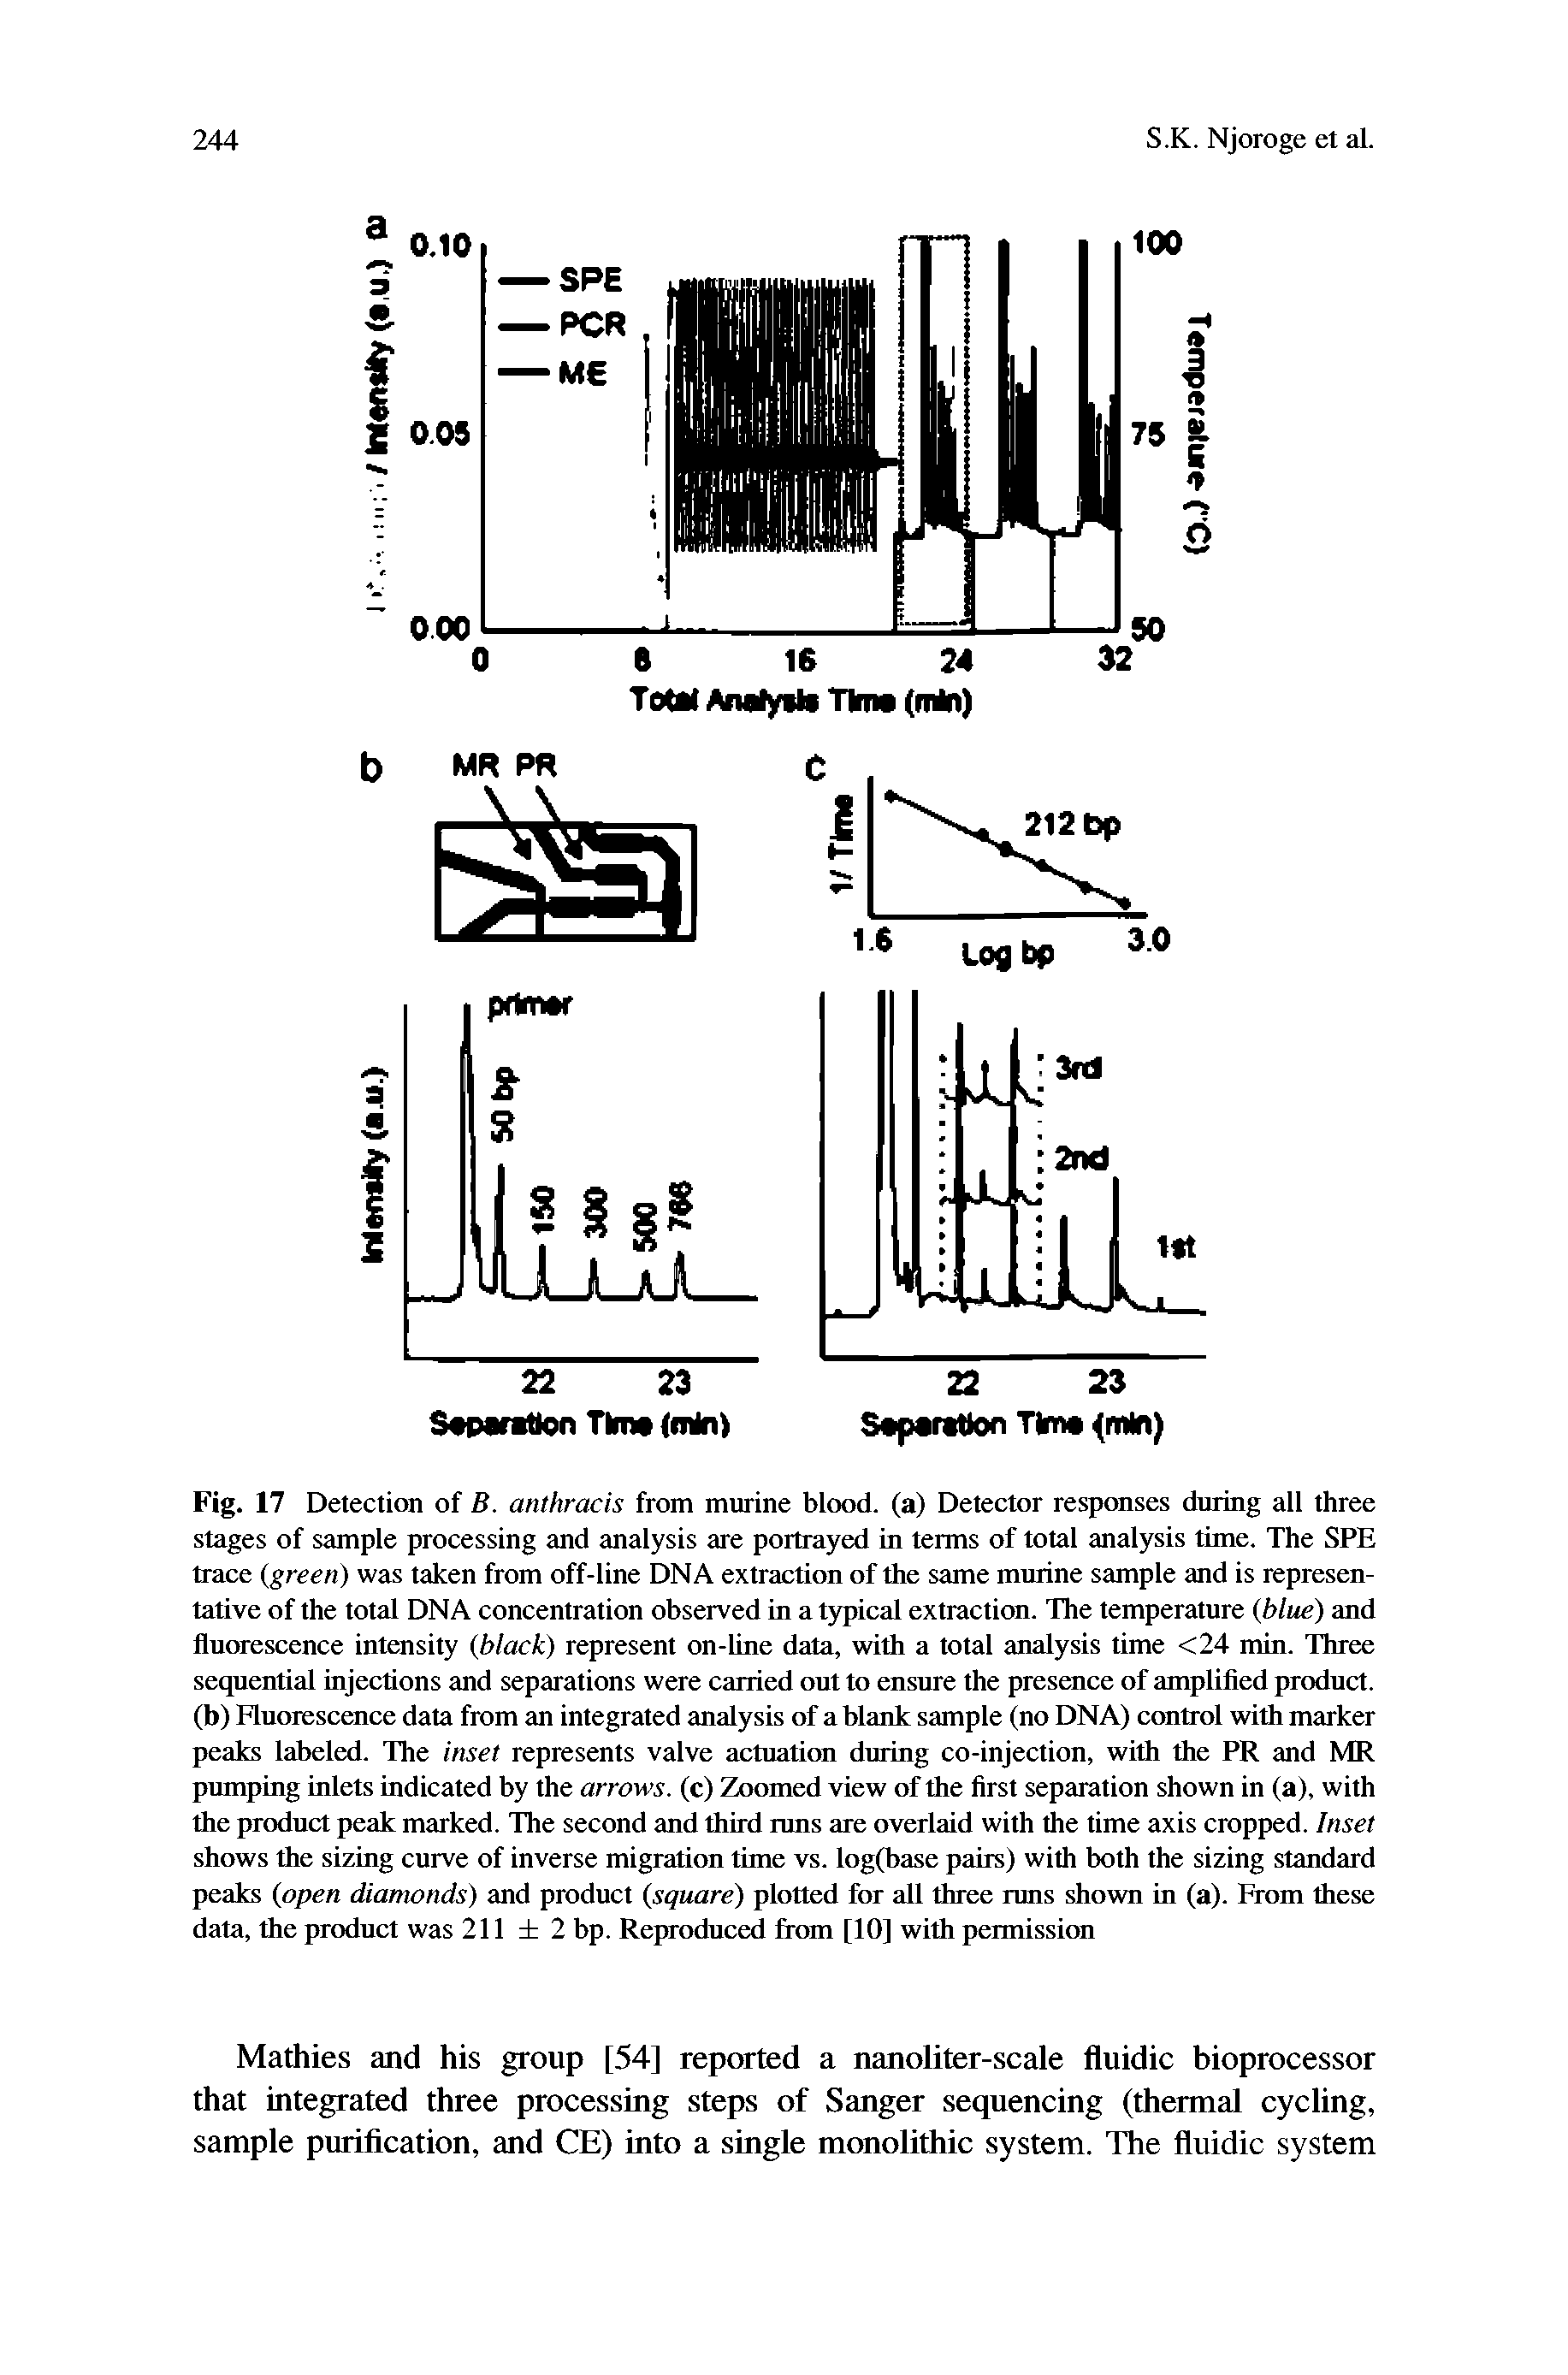 Fig. 17 Detection of B. anthracis from murine blood, (a) Detector responses during all three stages of sample processing and analysis are portrayed in terms of total analysis time. The SPE trace (green) was taken from off-line DNA extraction of the same murine sample and is representative of the total DNA concentration observed in a typical extraction. The temperature (blue) and fluorescence intensity (black) represent on-line data, with a total analysis time <24 min. Three sequential injections and separations were carried out to ensure the presence of amplified product, (b) Fluorescence data from an integrated analysis of a blank sample (no DNA) control with marker peaks labeled. The inset represents valve actuation during co-injection, with the PR and MR pumping inlets indicated by the arrows, (c) Zoomed view of the first separation shown in (a), with the product peak marked. The second and third runs are overlaid with the time axis cropped. Inset shows the sizing curve of inverse migration time vs. logfbase pairs) with both the sizing standard peaks (open diamonds) and product (square) plotted for all three runs shown in (a). From these data, the product was 211 2 bp. Reproduced from [10] with permission...